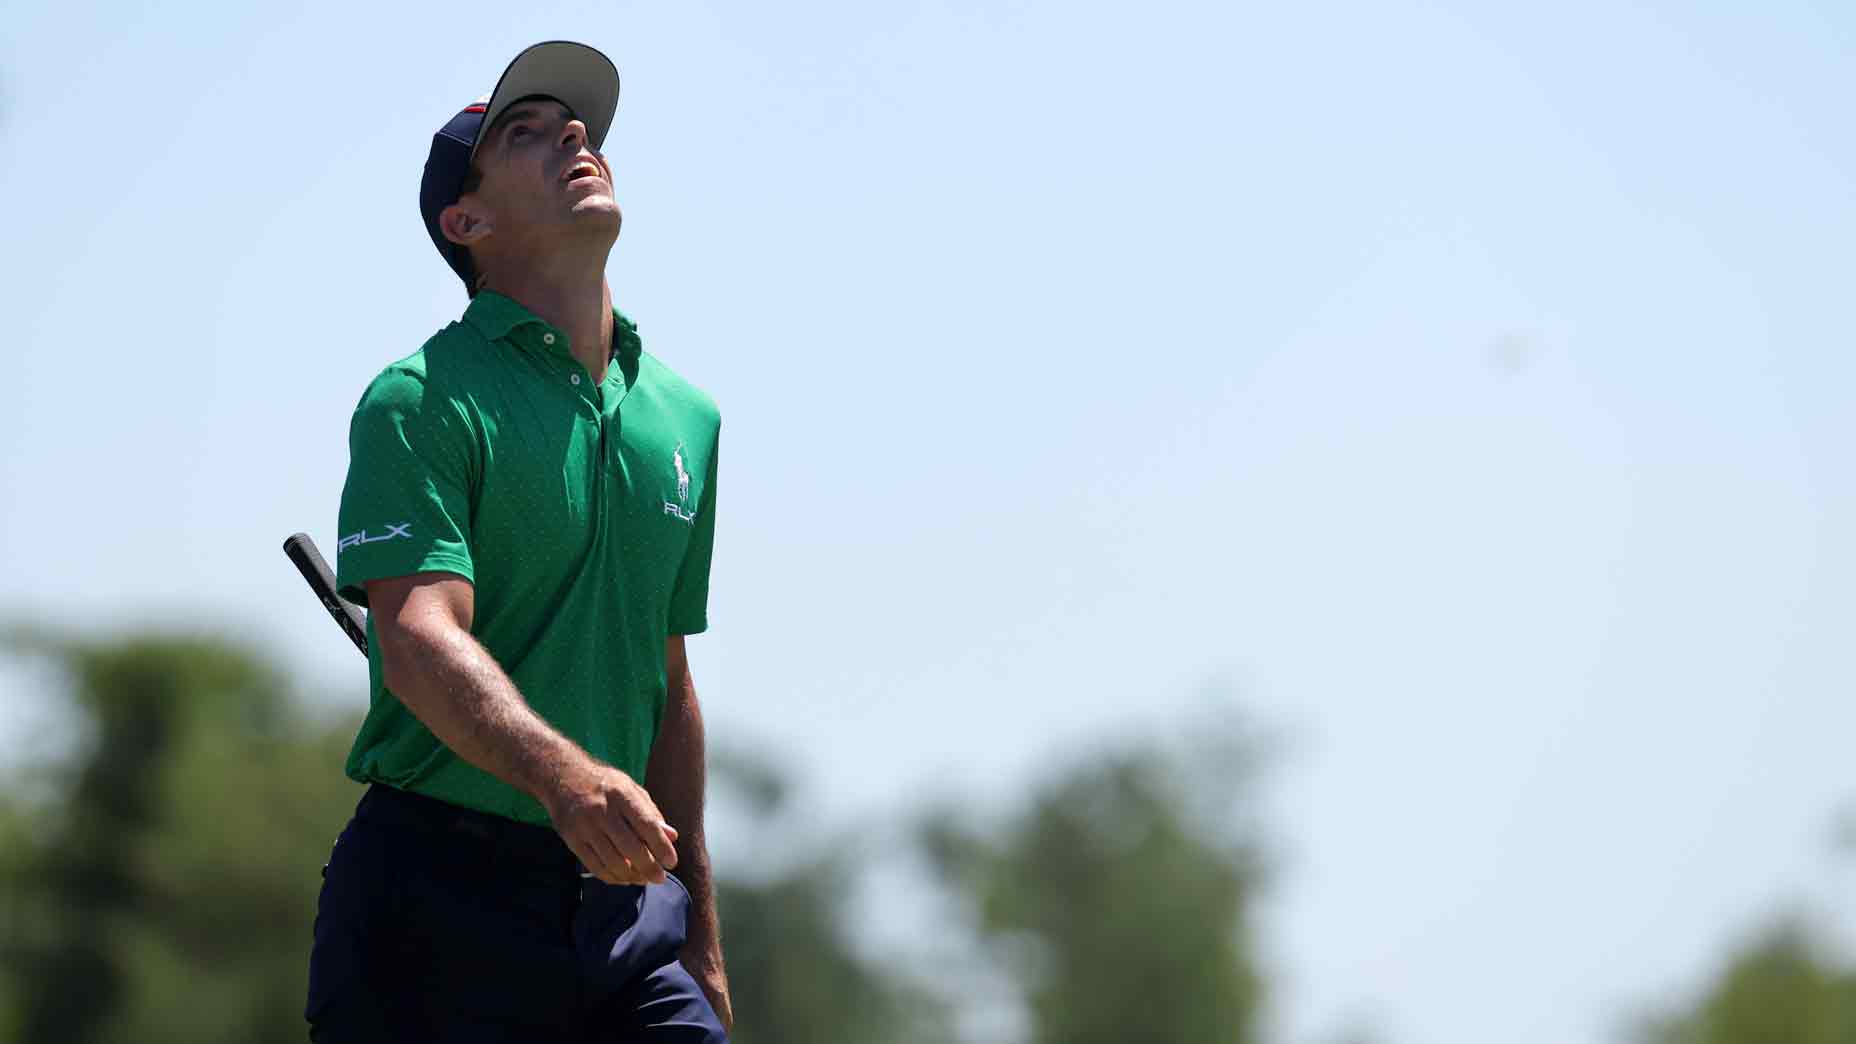 Billy Horschel opens up about his inconsistency this year, saying the stress and fatigue led him to crying at one point